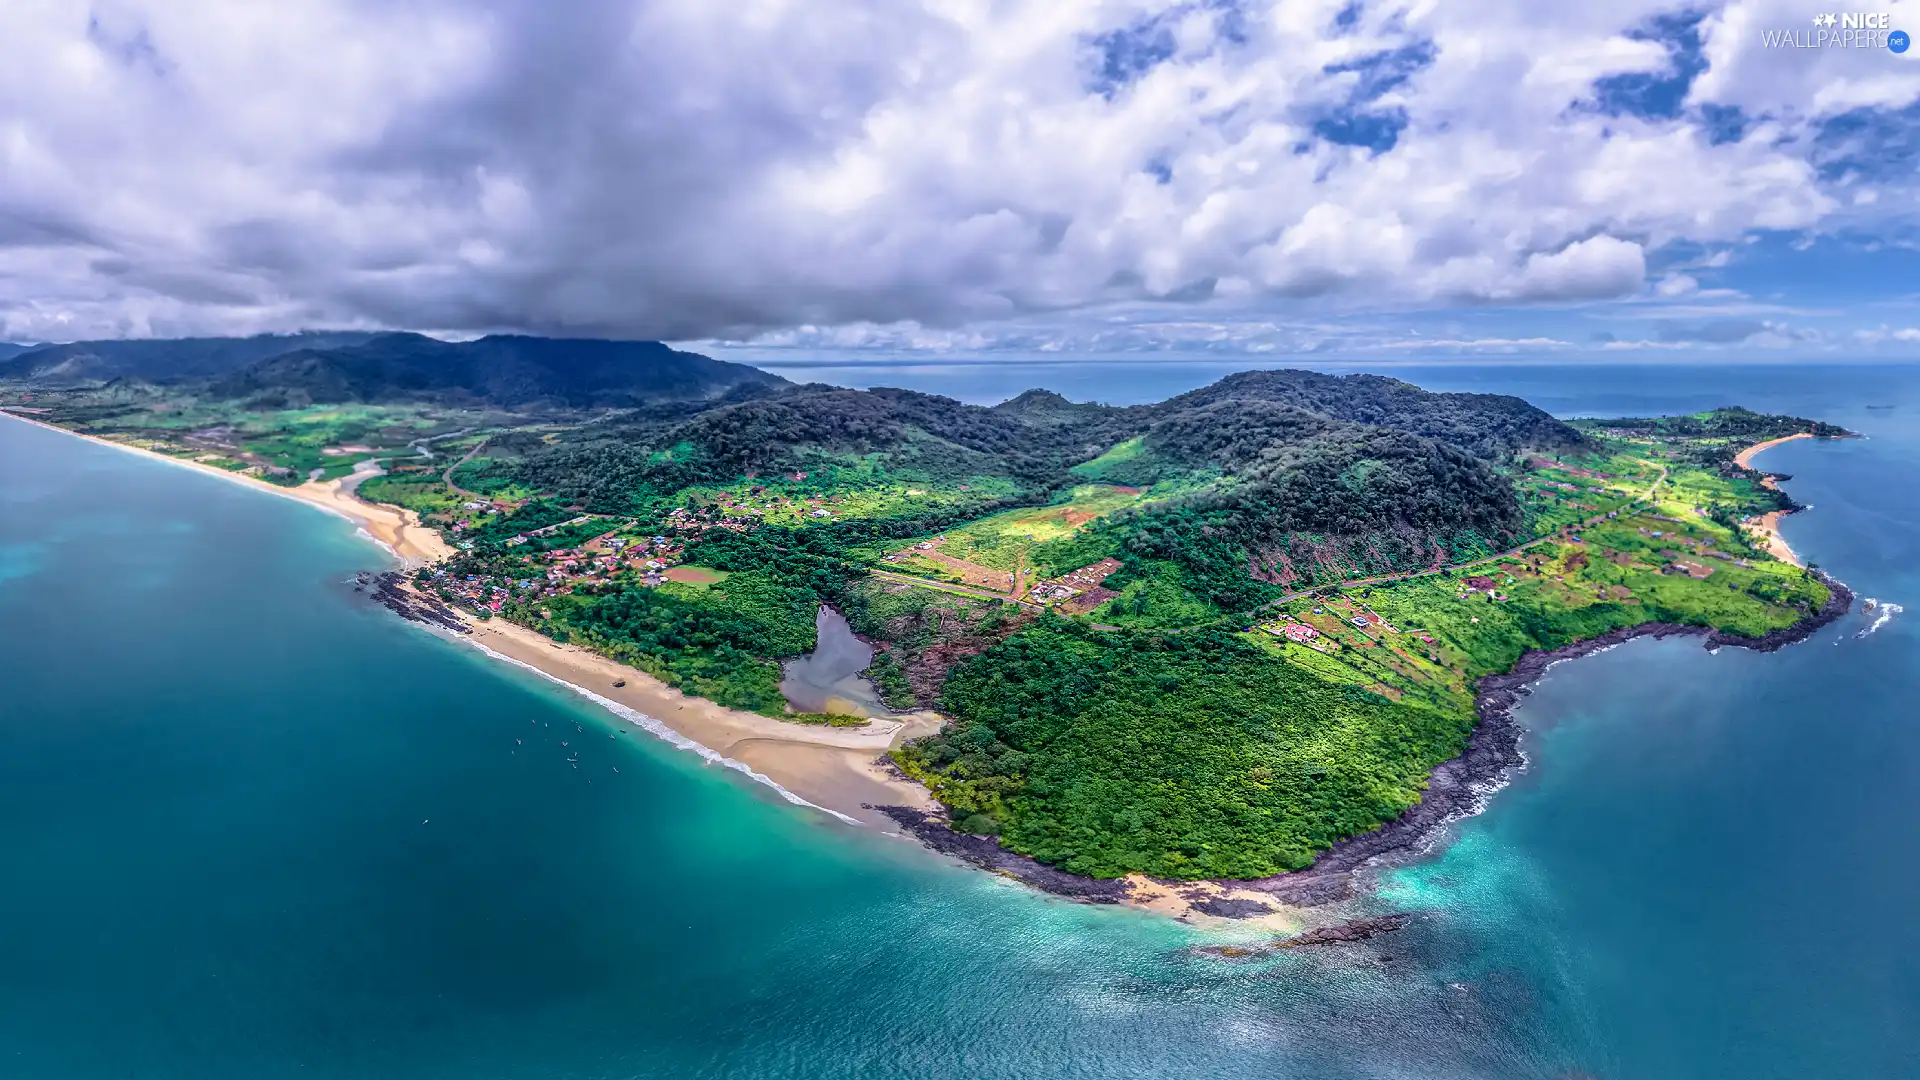 Island, Aerial View, Sky, clouds, sea, Mountains